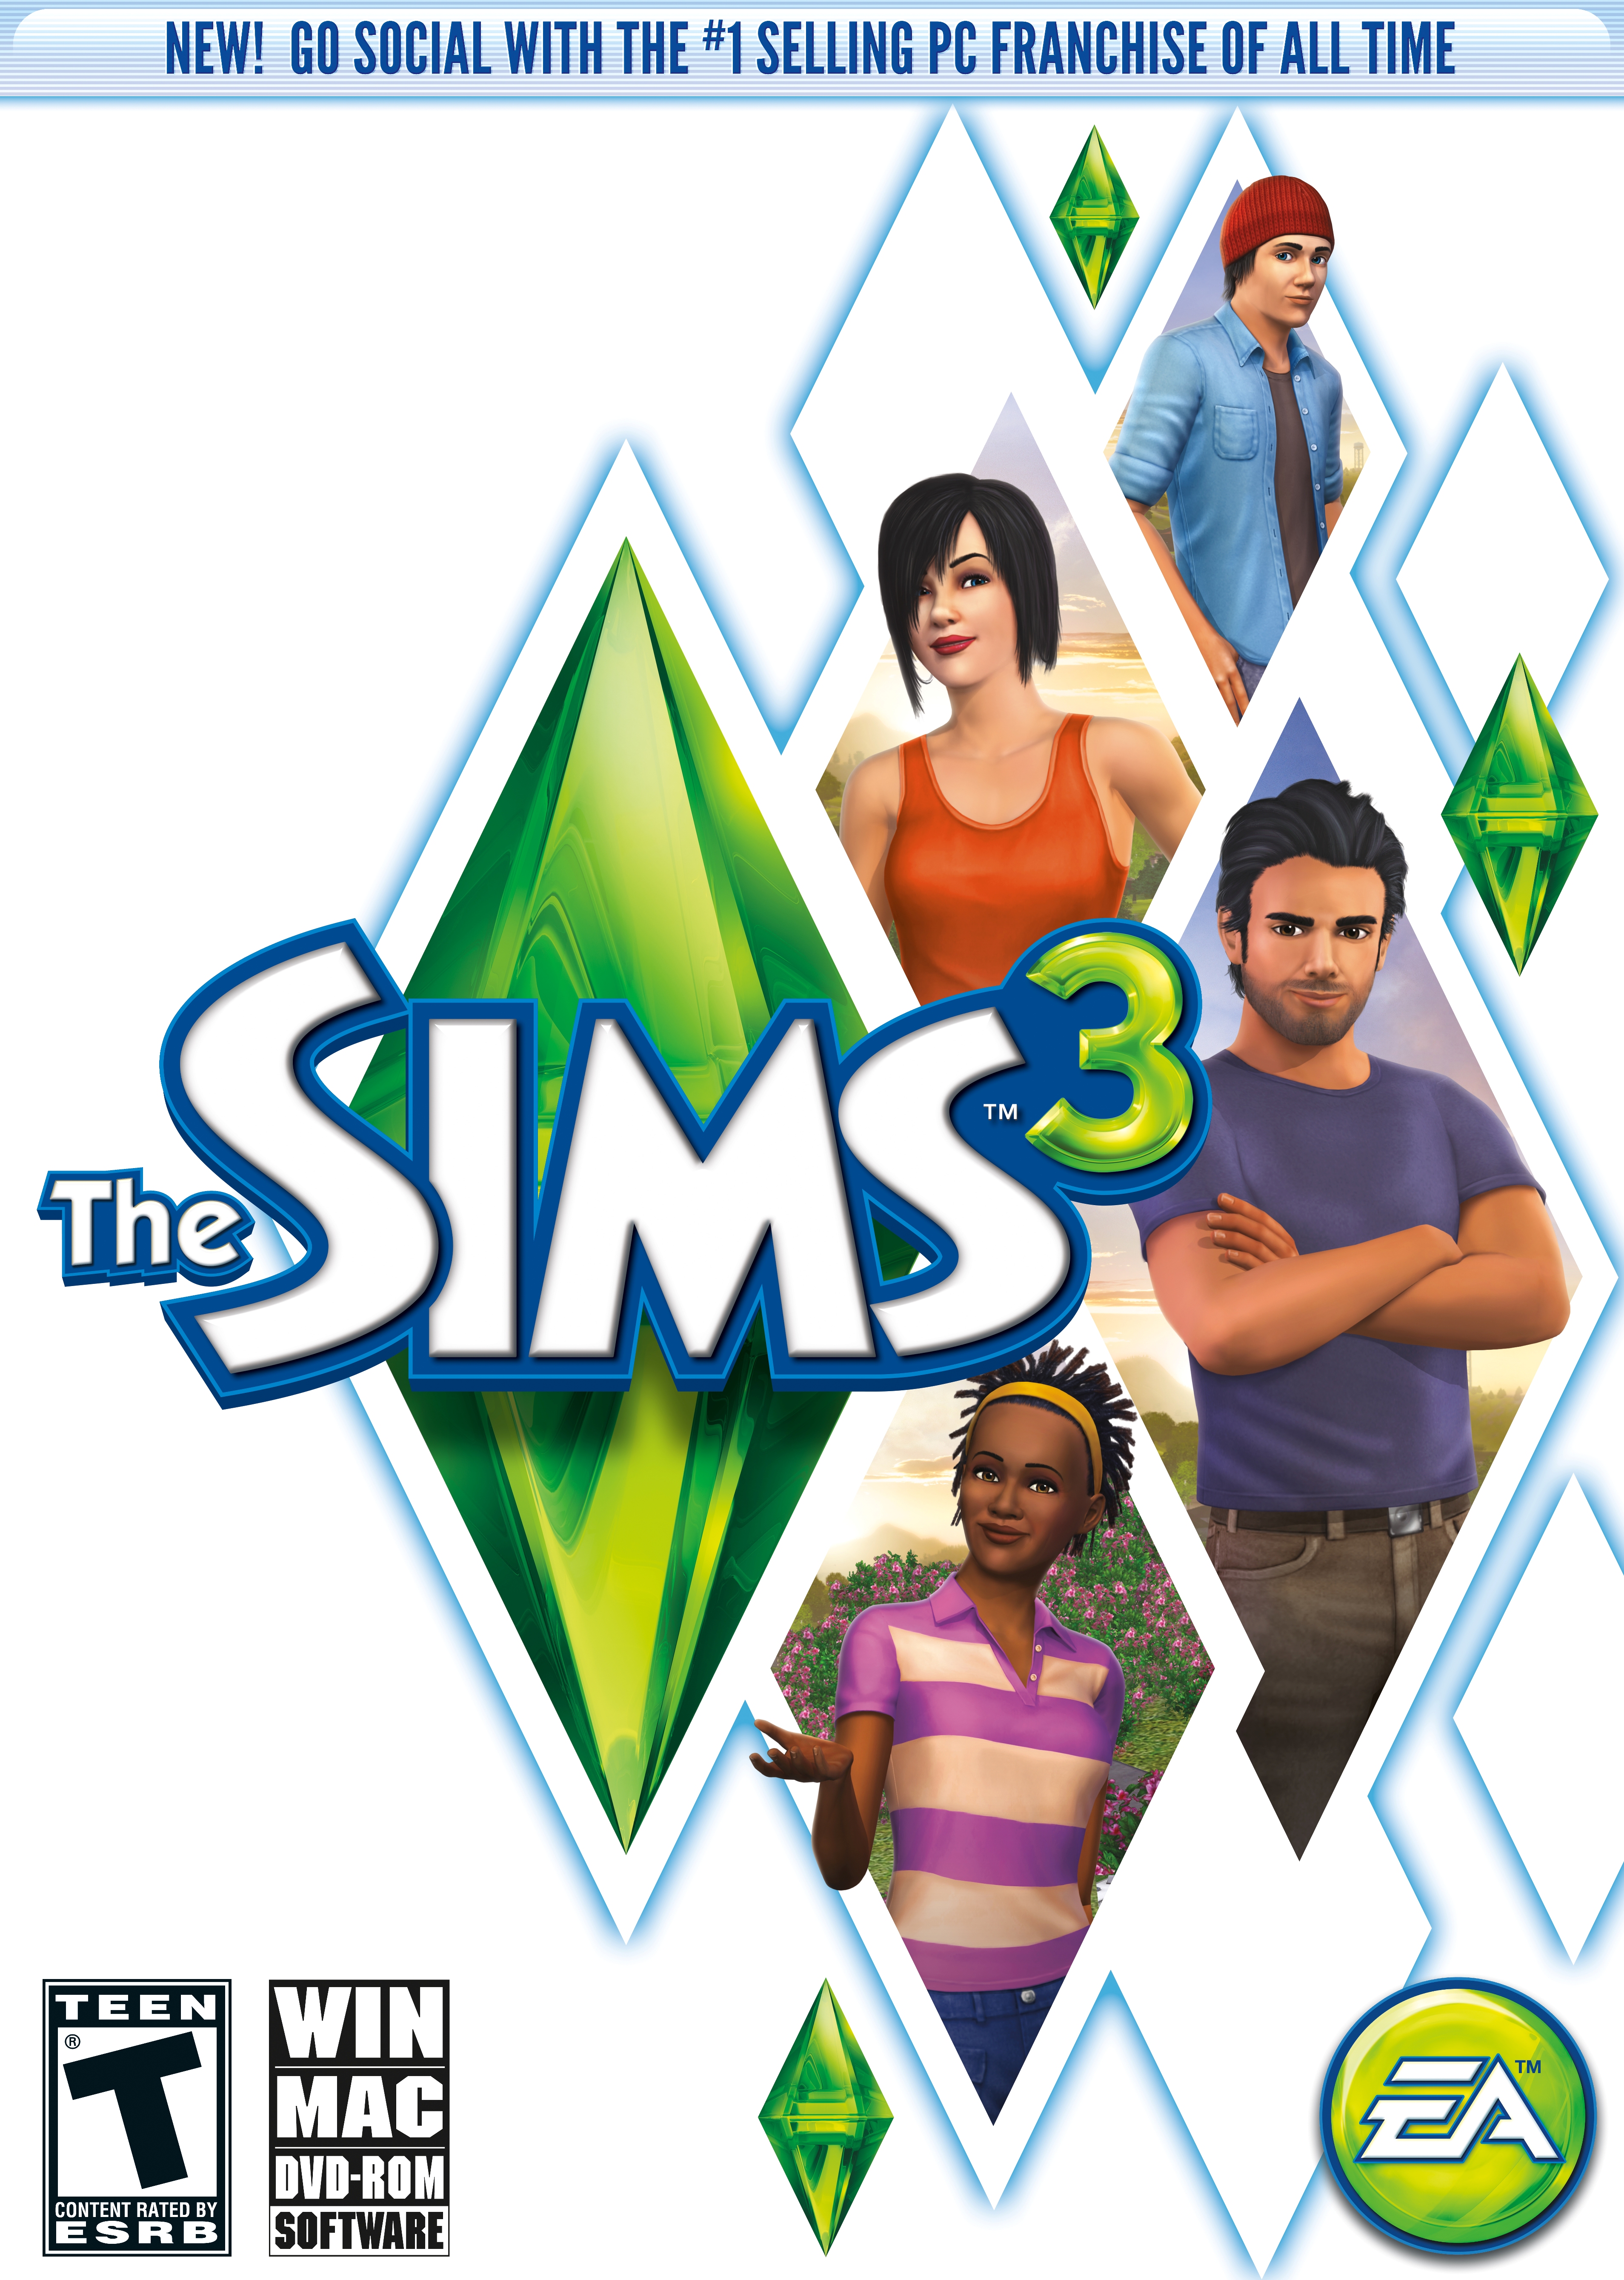 when did sims 3 come out